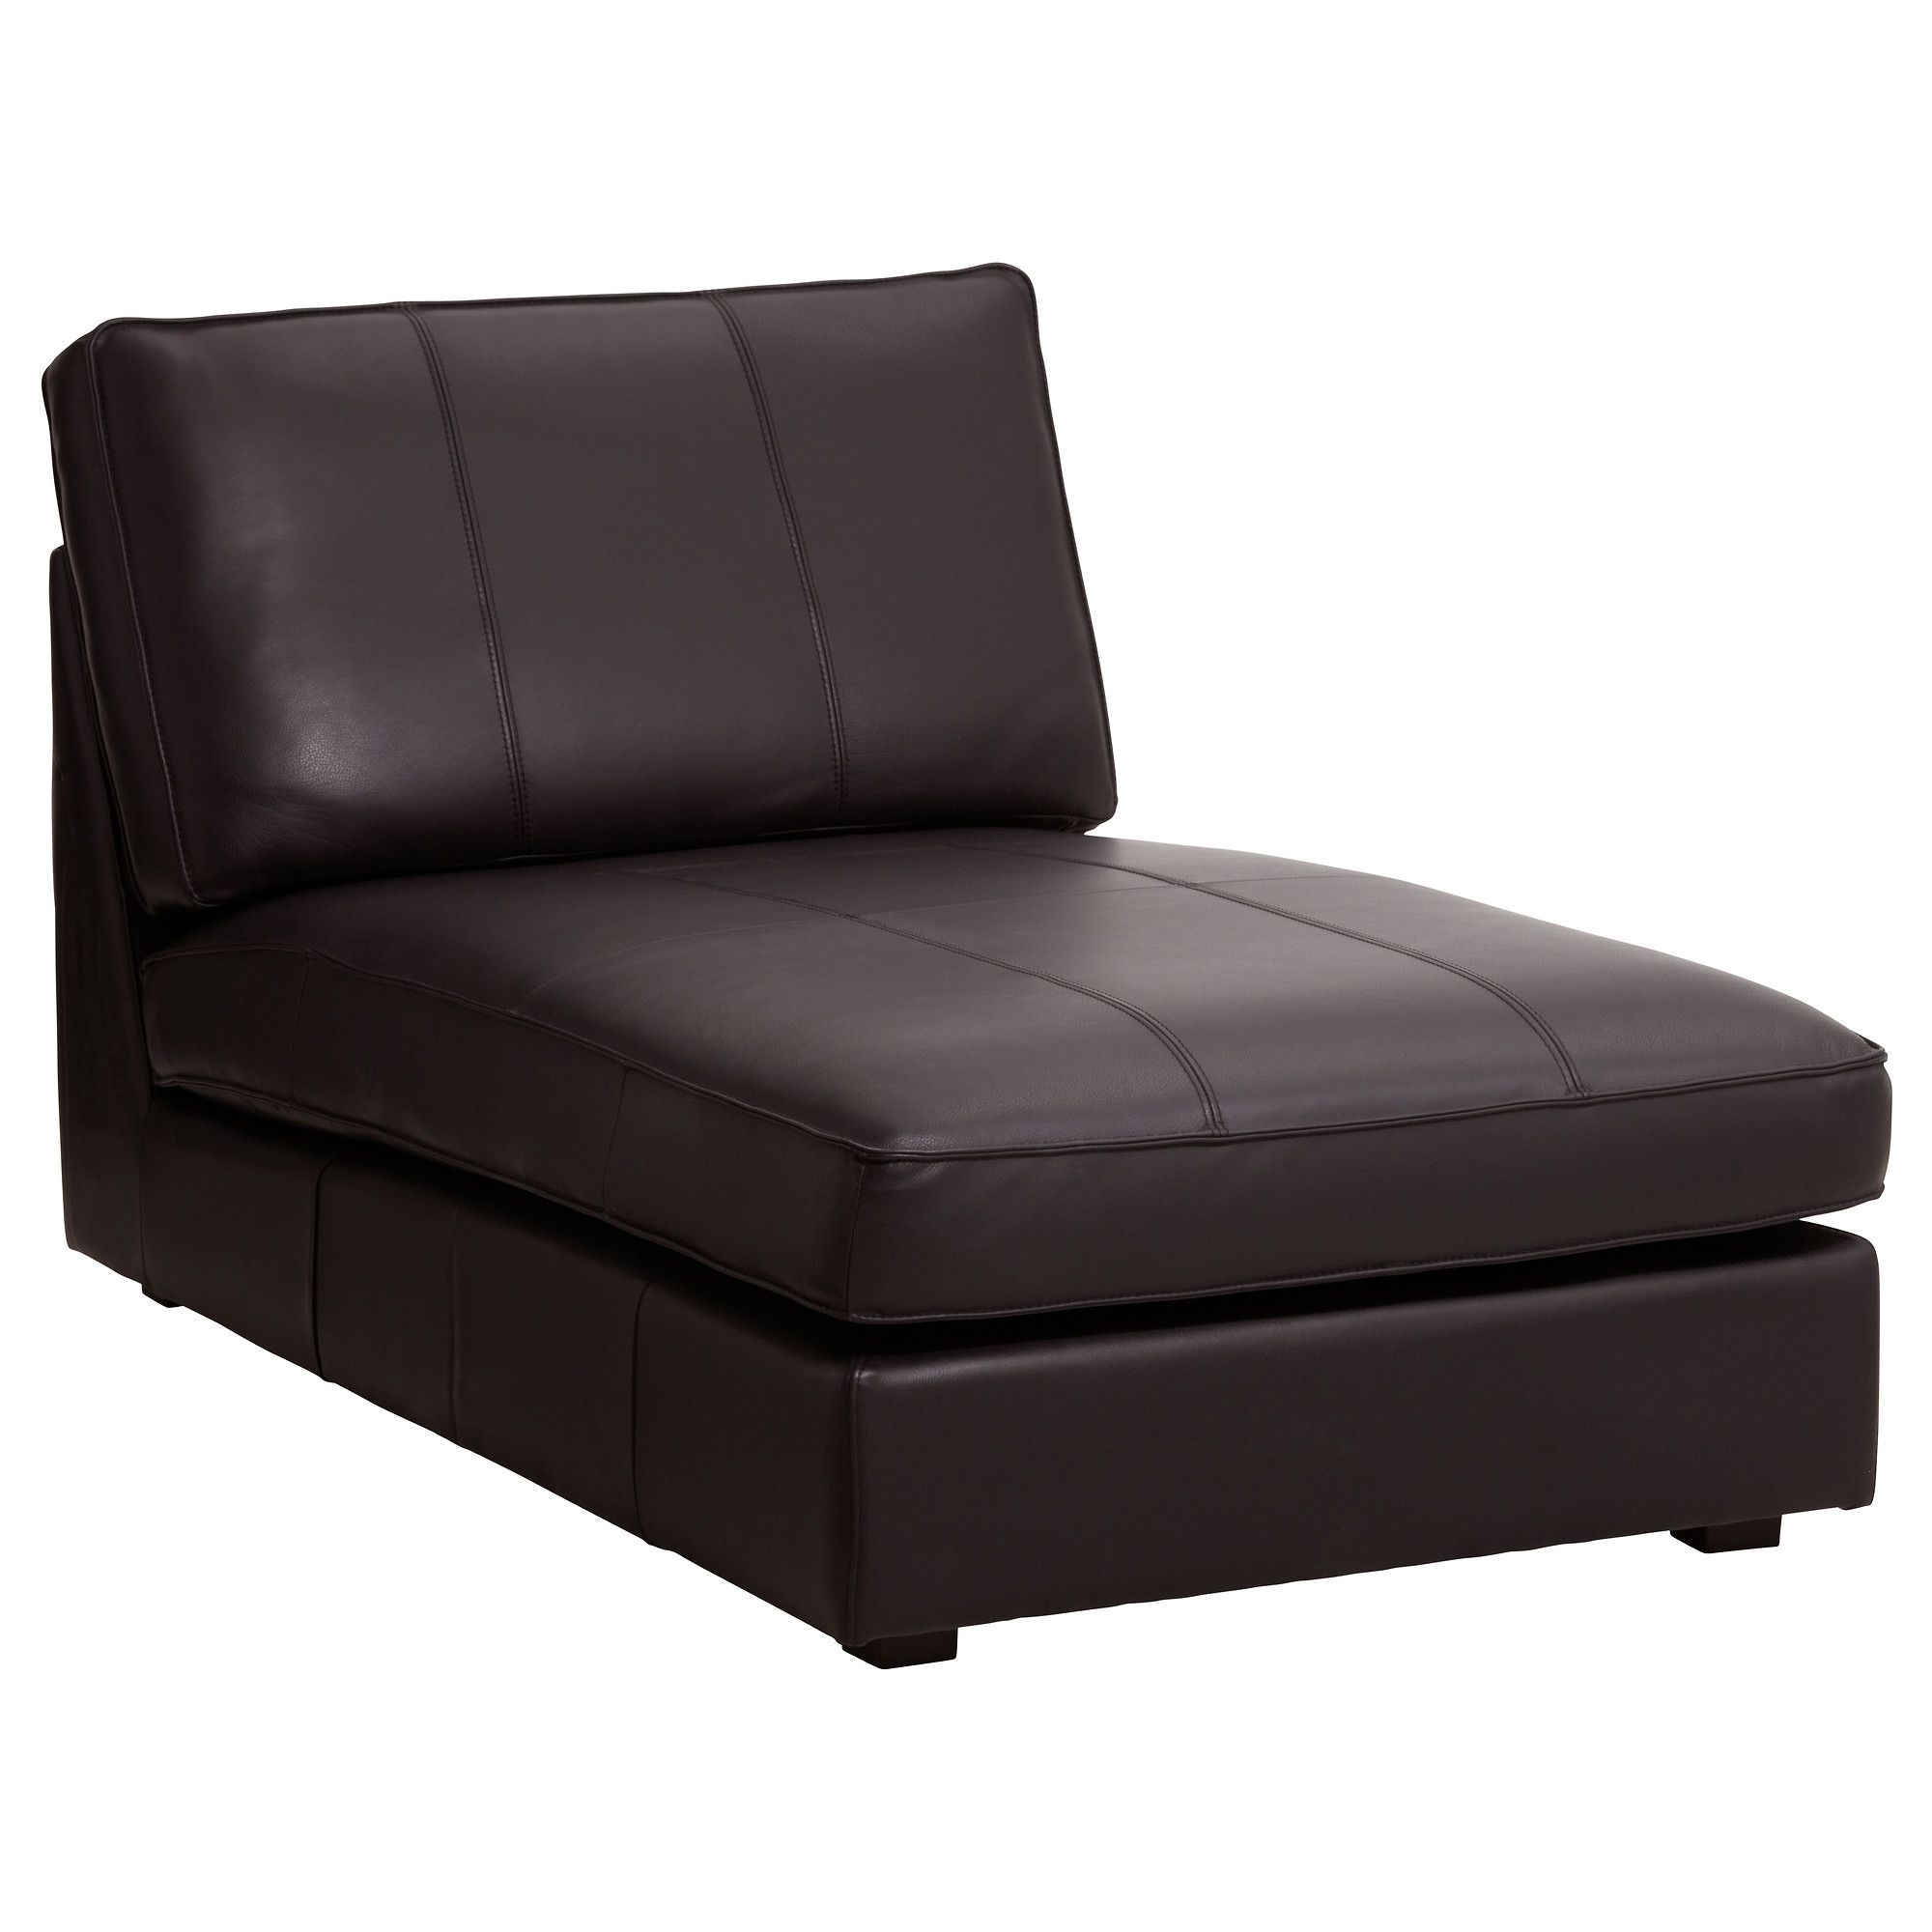 Ikea Chaise Lounge Chairs In Current Kivik Chaise – Grann/bomstad Dark Brown – Ikea (View 1 of 15)